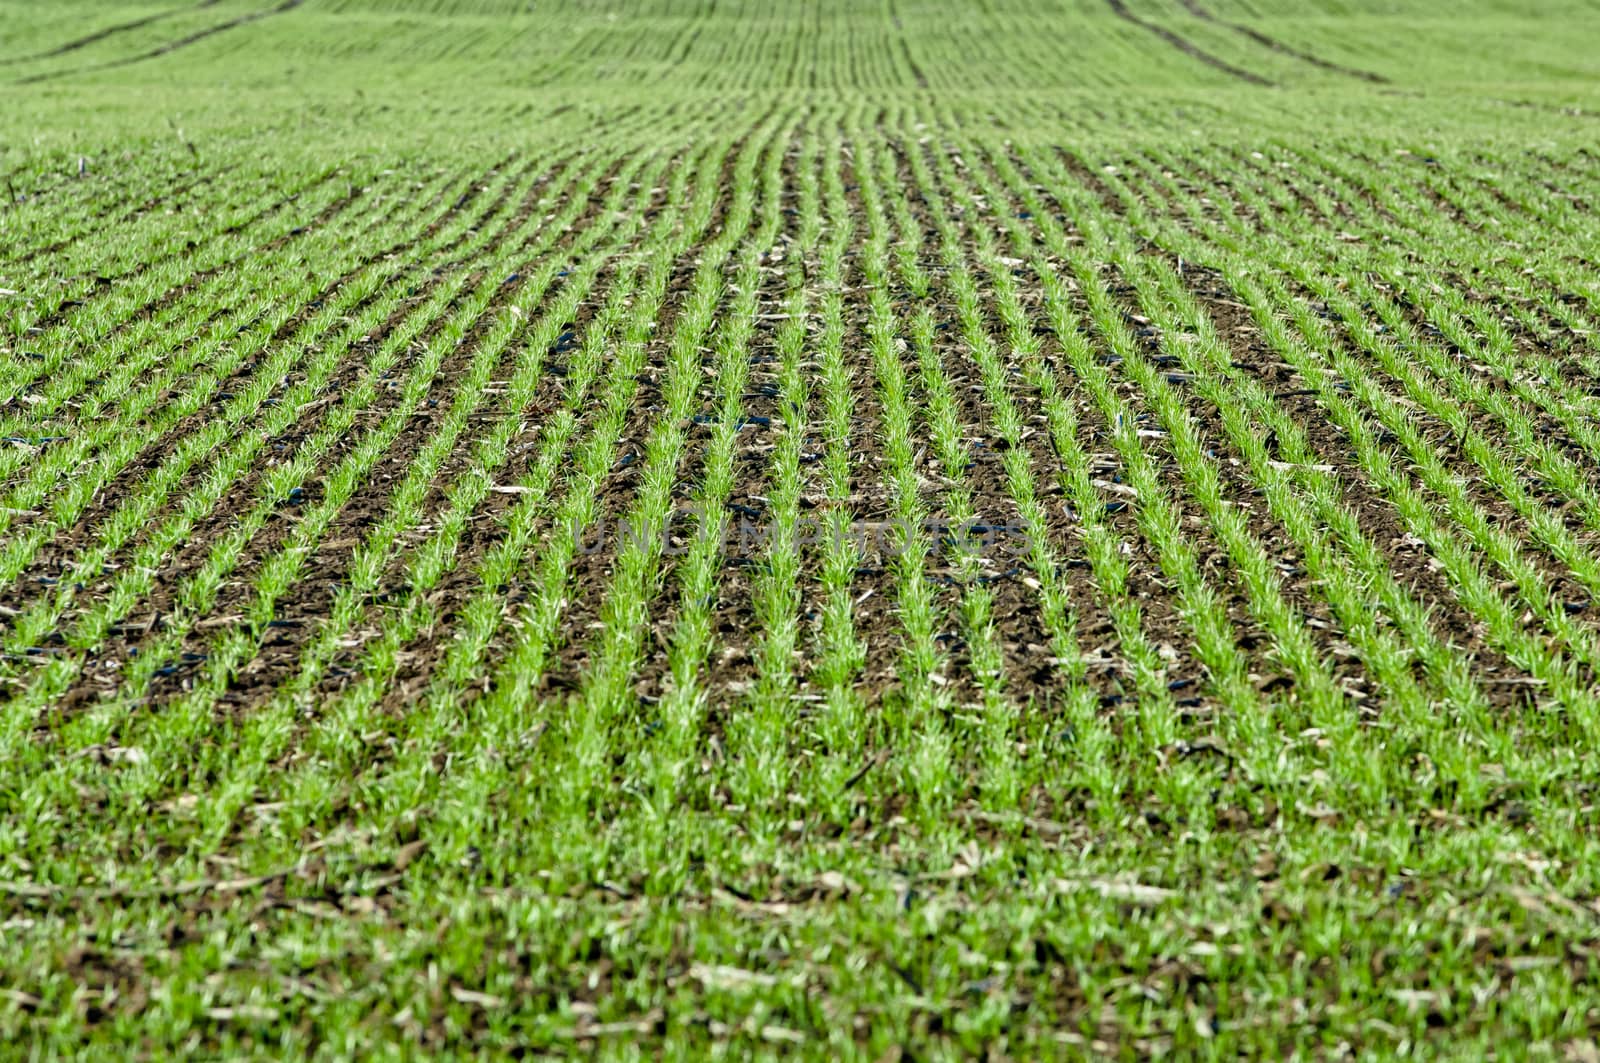 Crop of young seedlings in an agricultural field in springtime